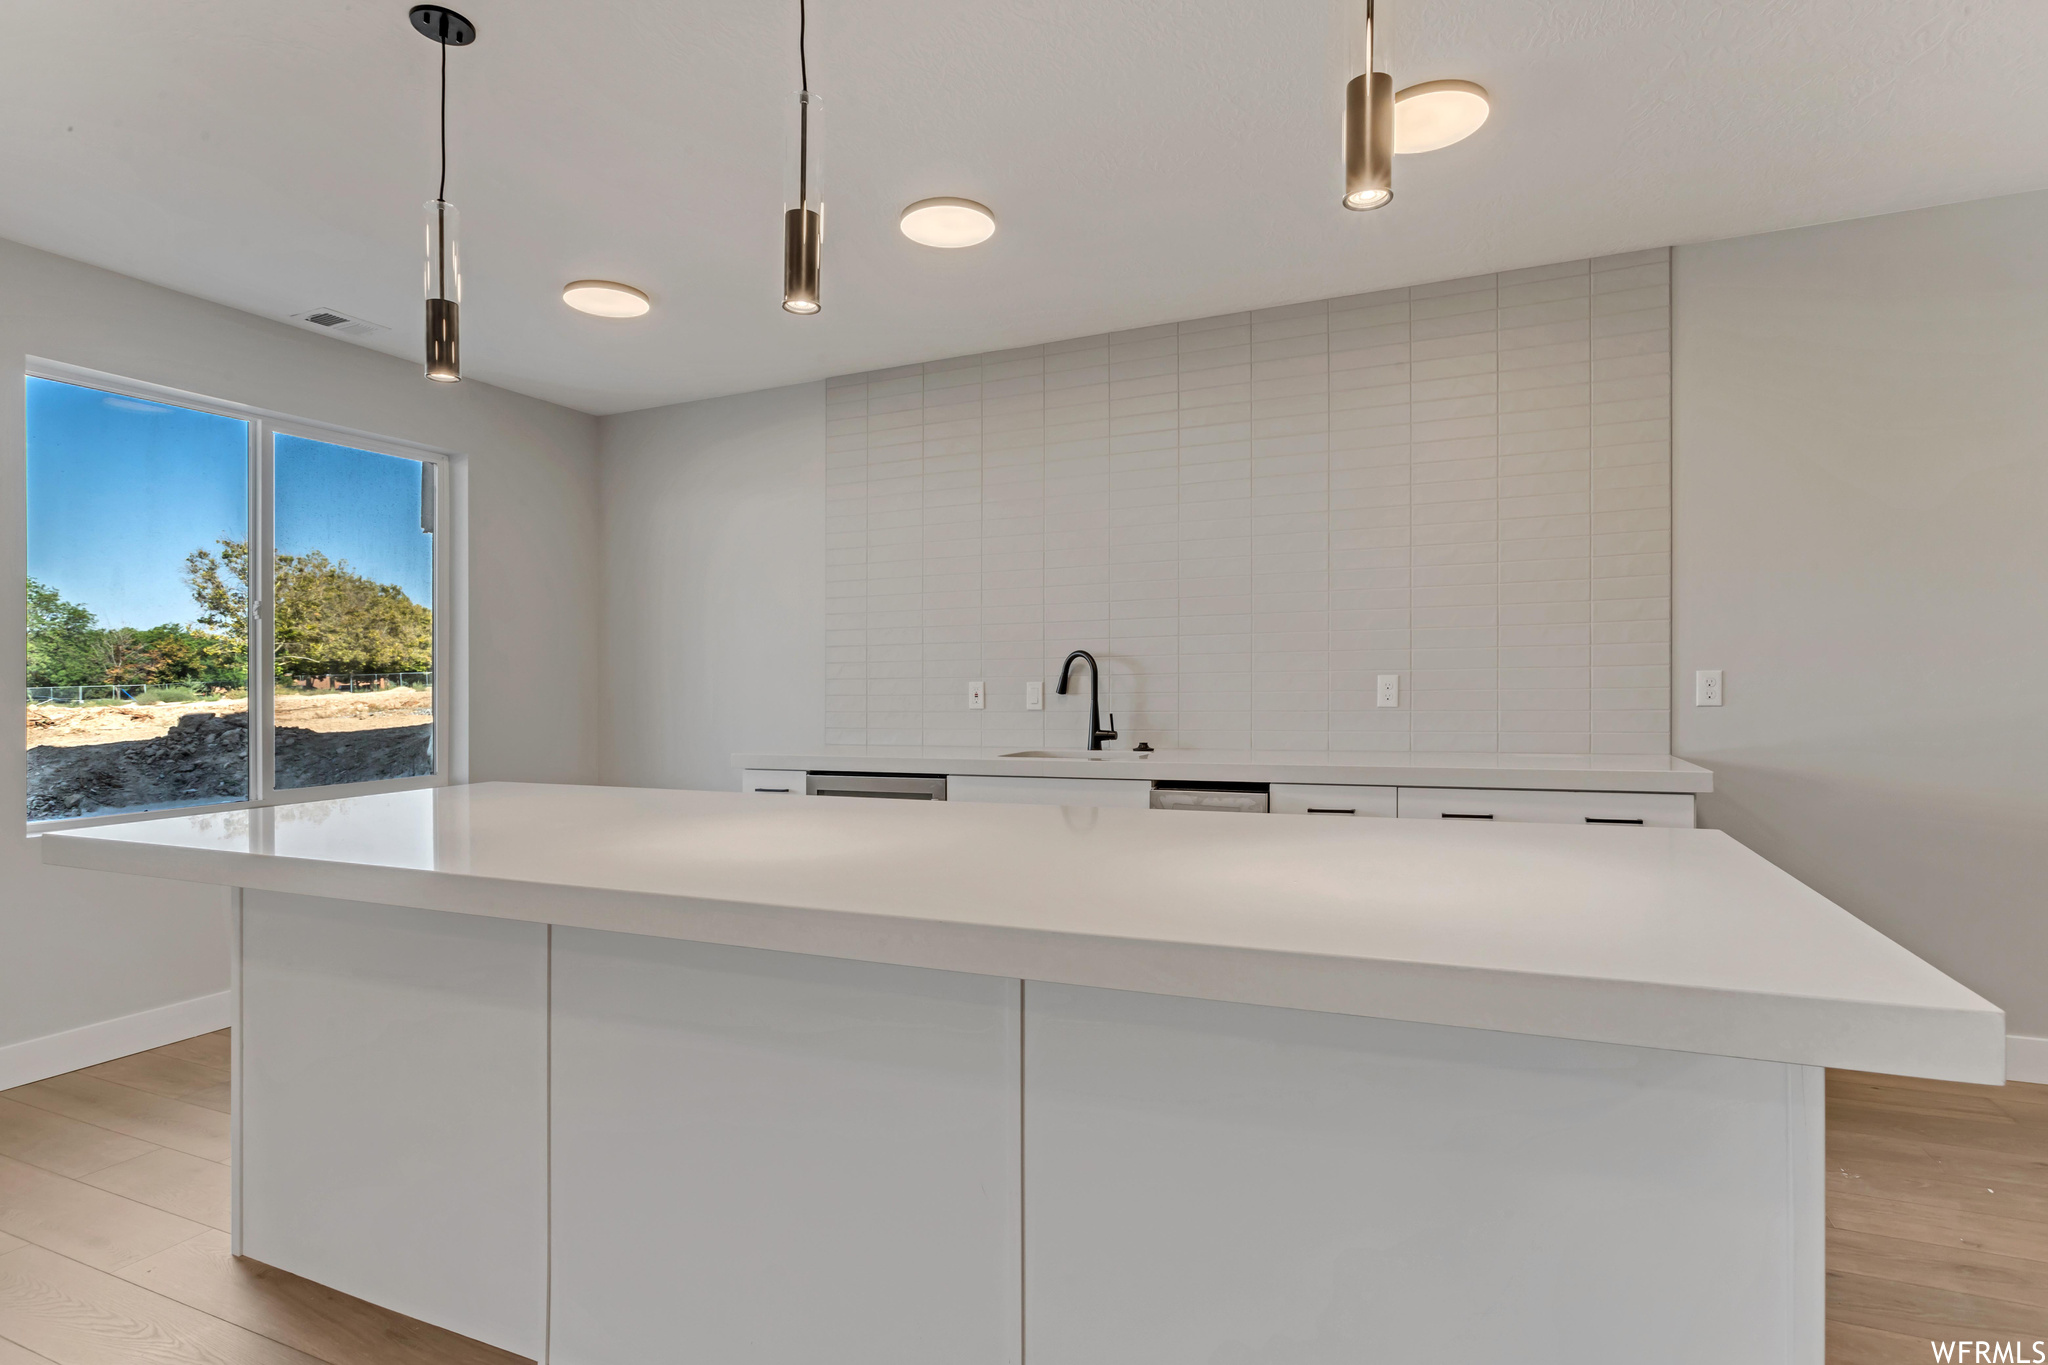 The owner chose to keep this area light, with white cabinets, quartz countertops and backsplash tile